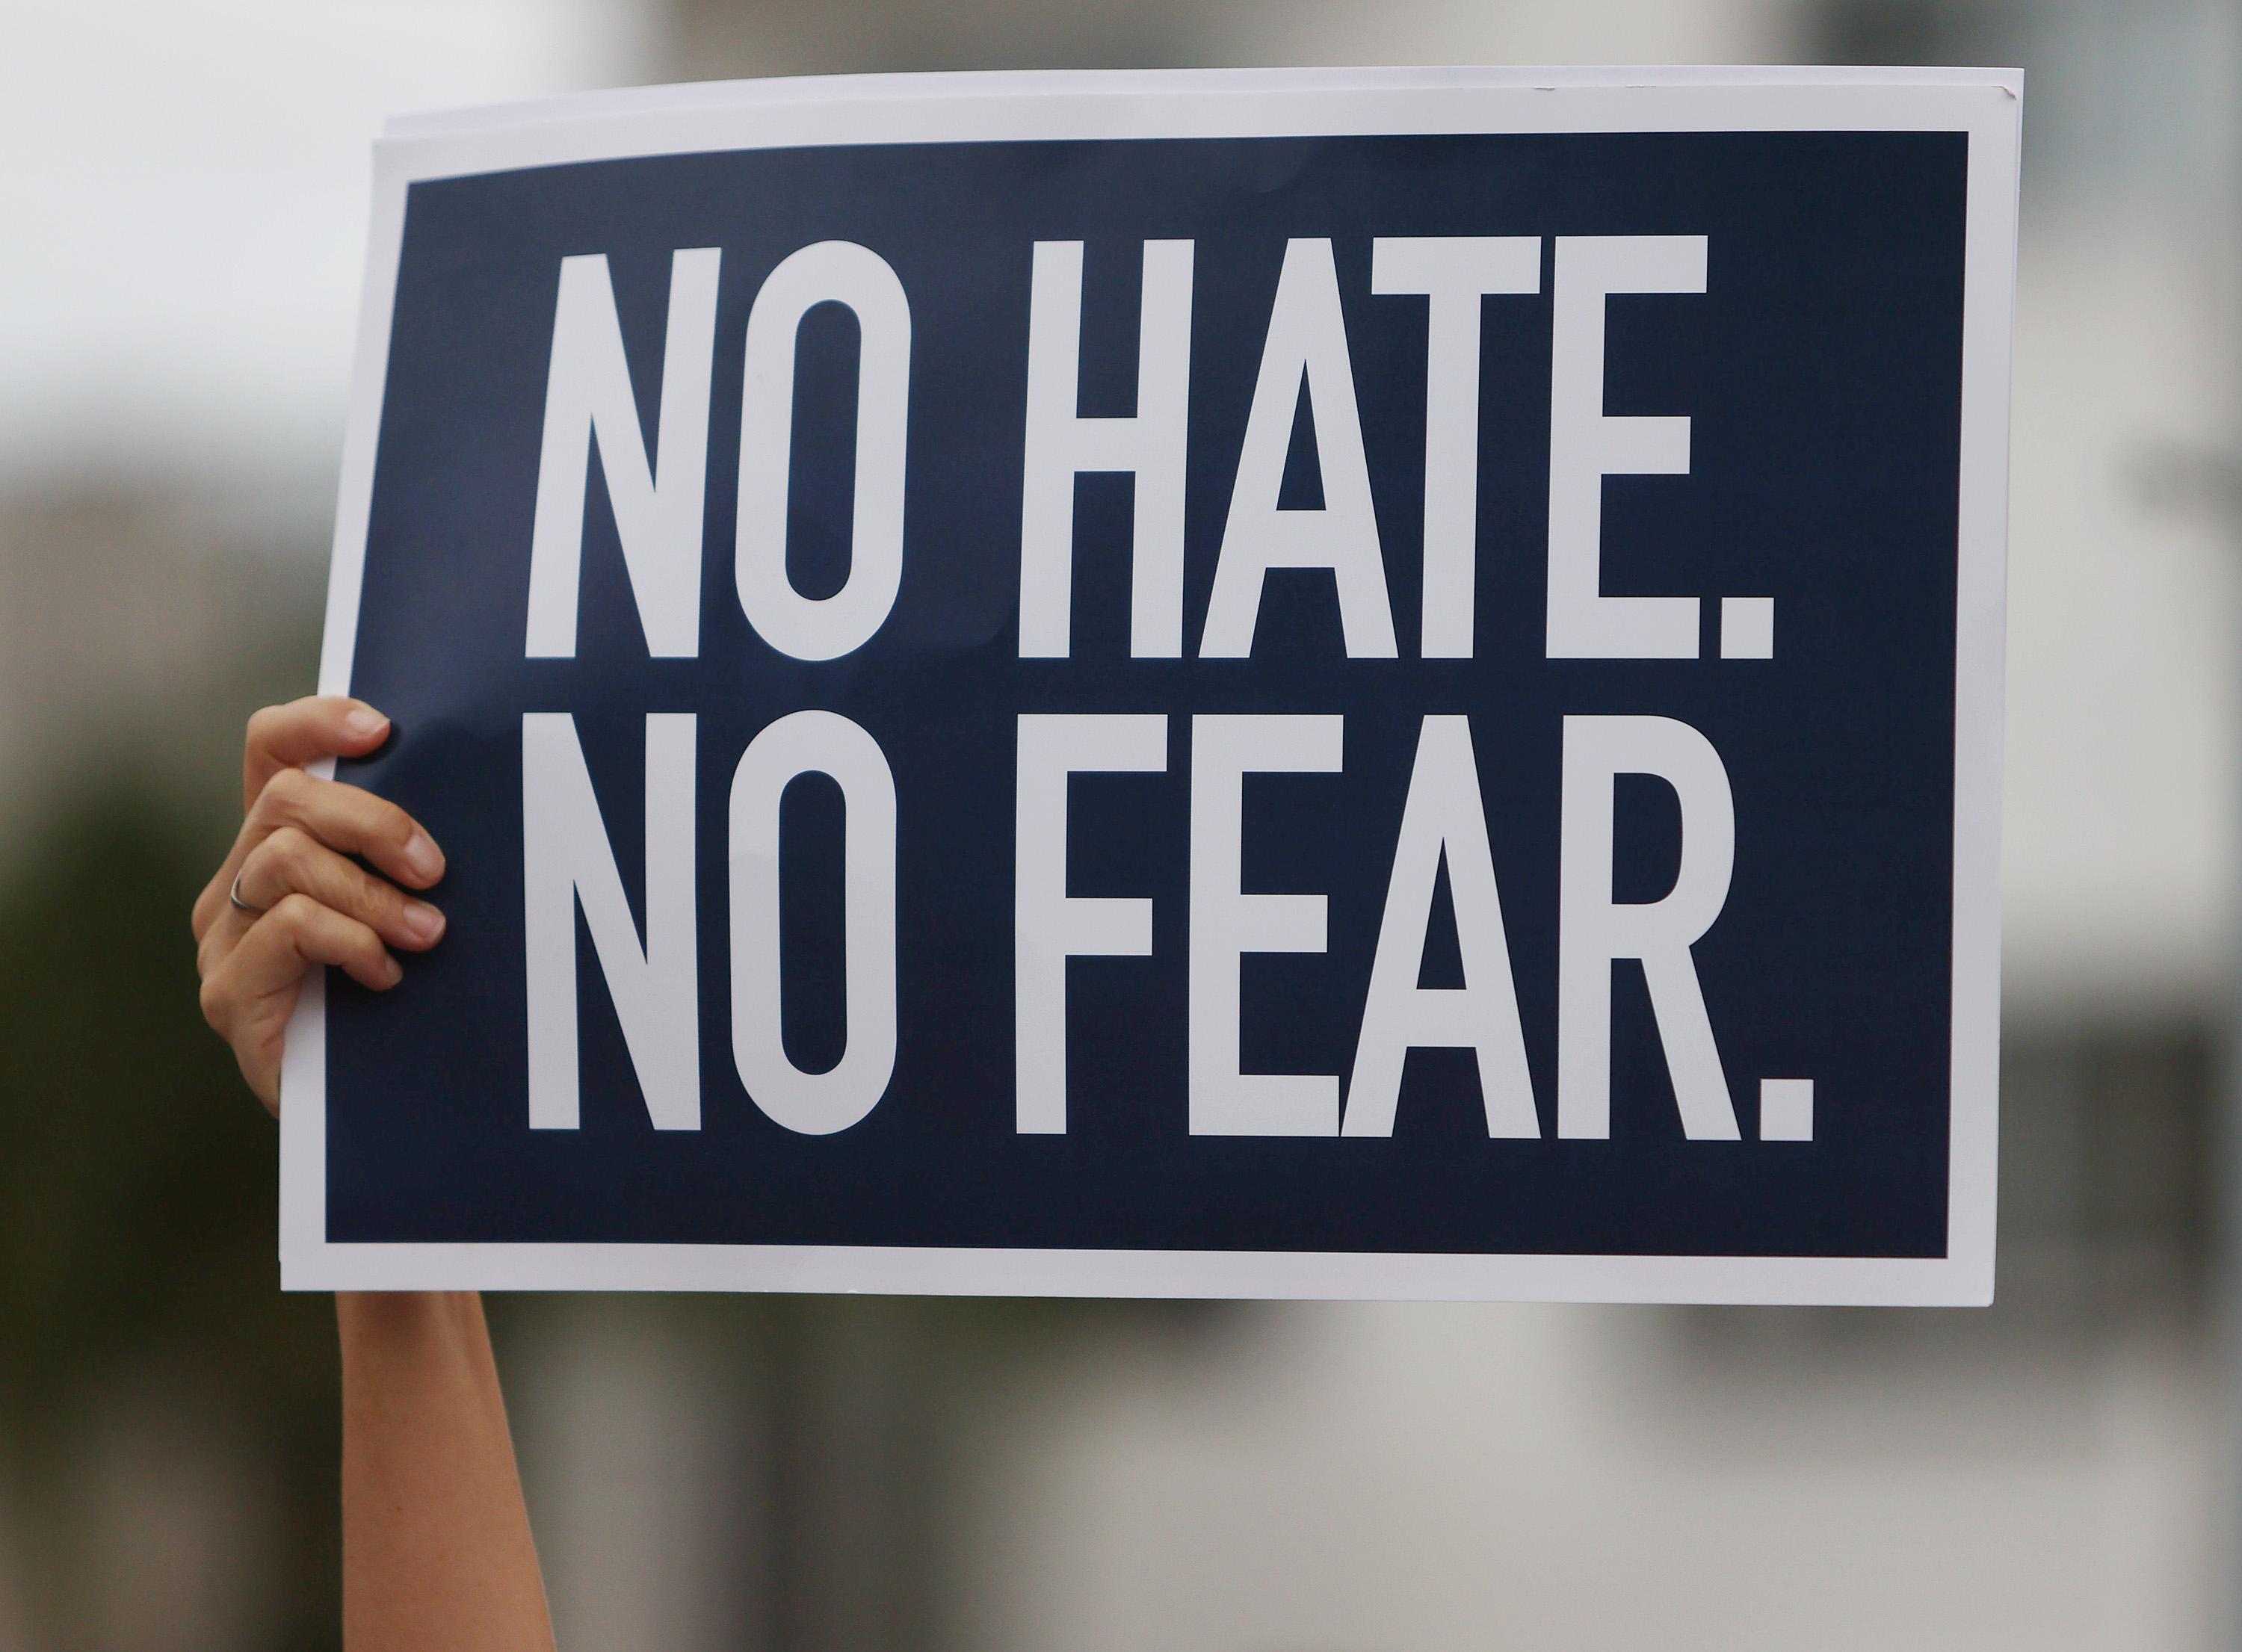 Southern California City Makes It a Crime to Distribute ‘Hateful’ Flyers